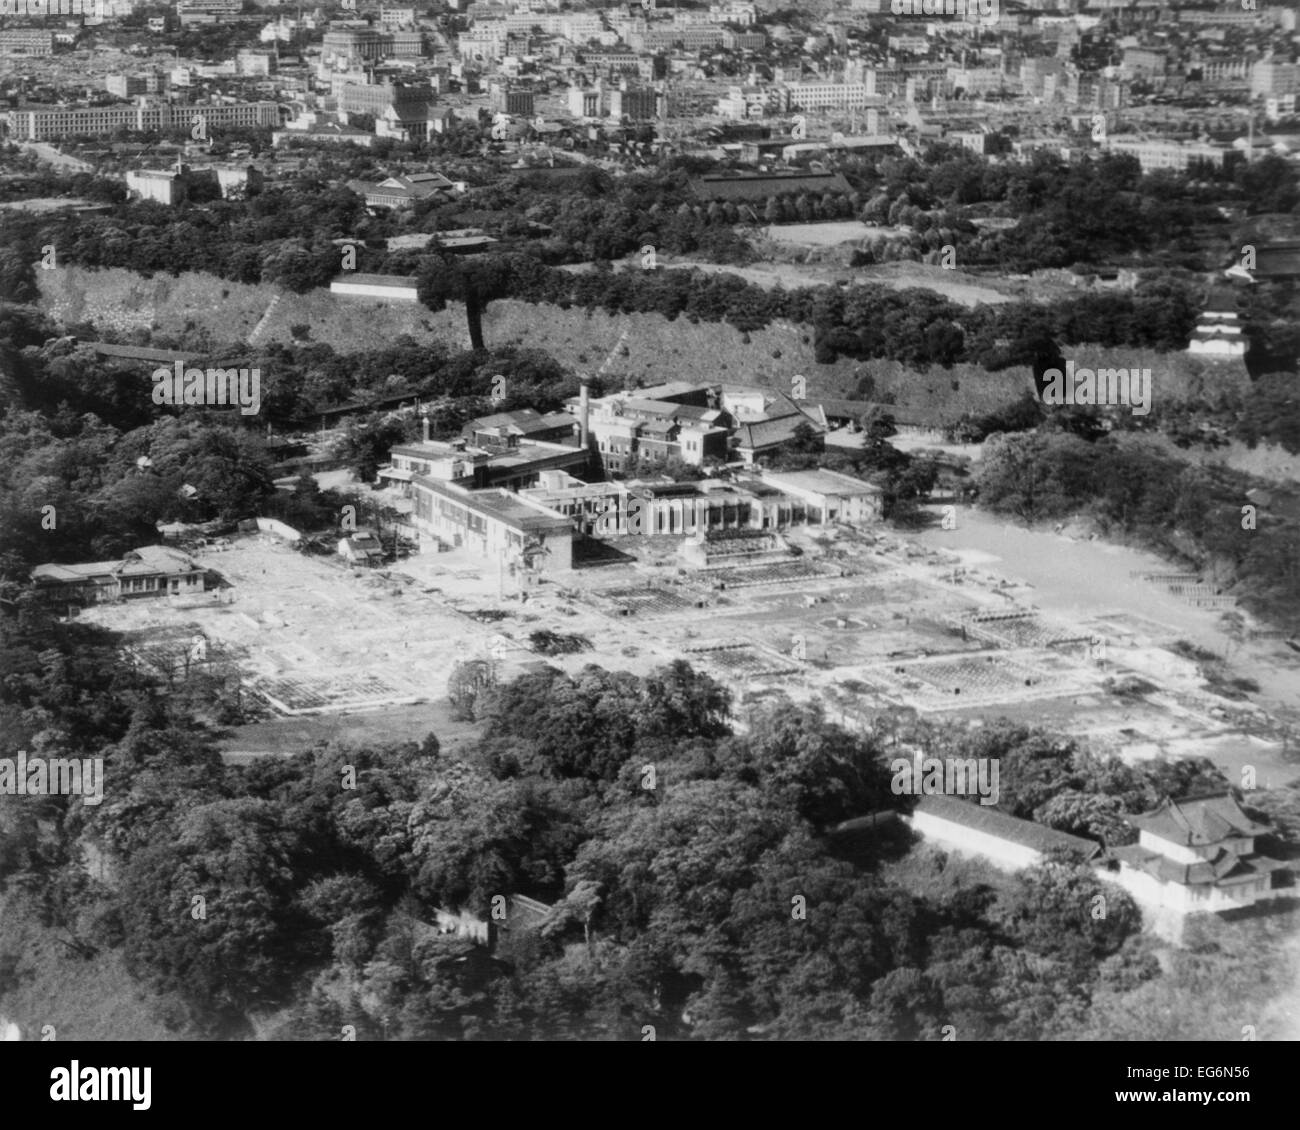 Aerial view of the Imperial Palace in Tokyo, after being bombed by U.S. airplanes. The damaged buildings are outside the walls Stock Photo